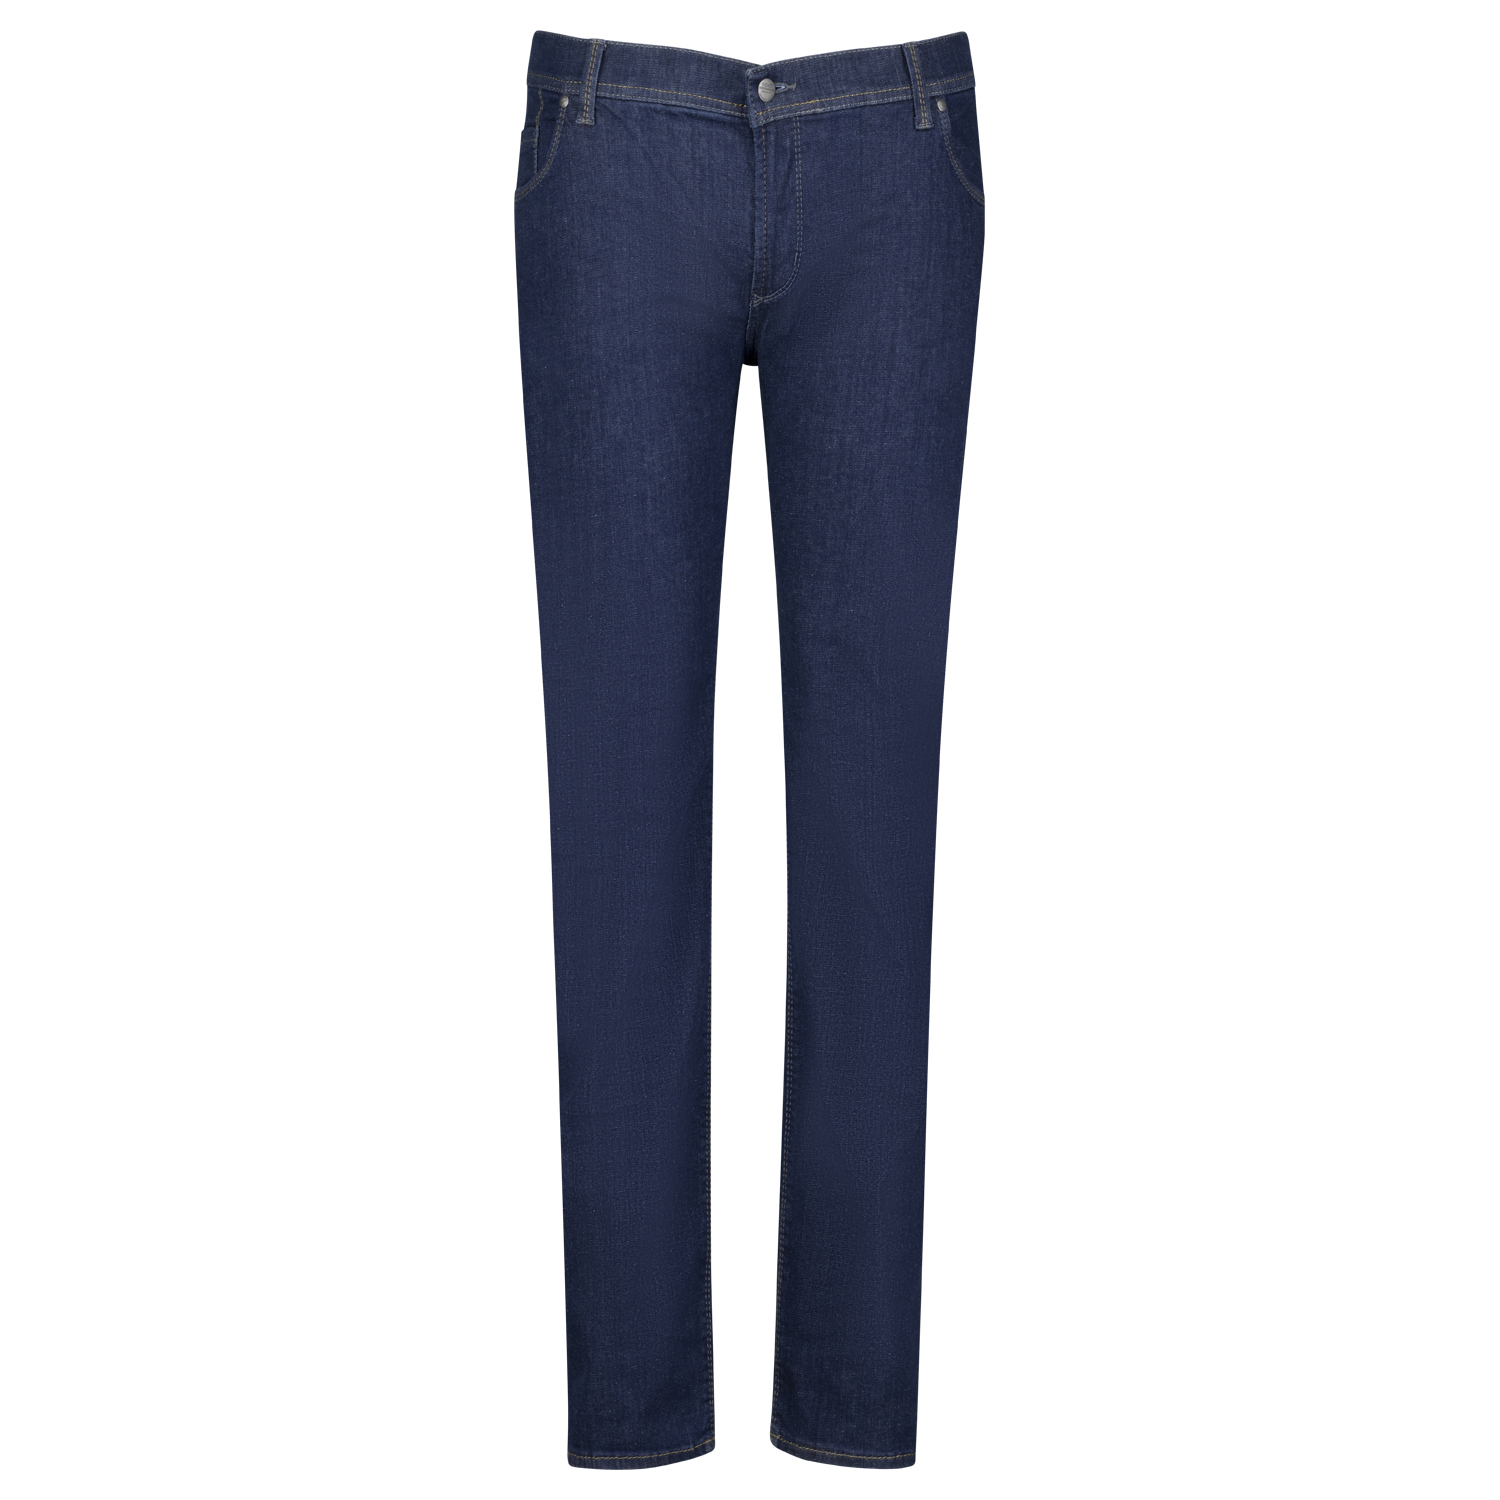 5-Pocket Jeans homme avec stretch "Thomas" dark blue stonewash by Pioneer grandes tailles (Taille basse): 28 - 40